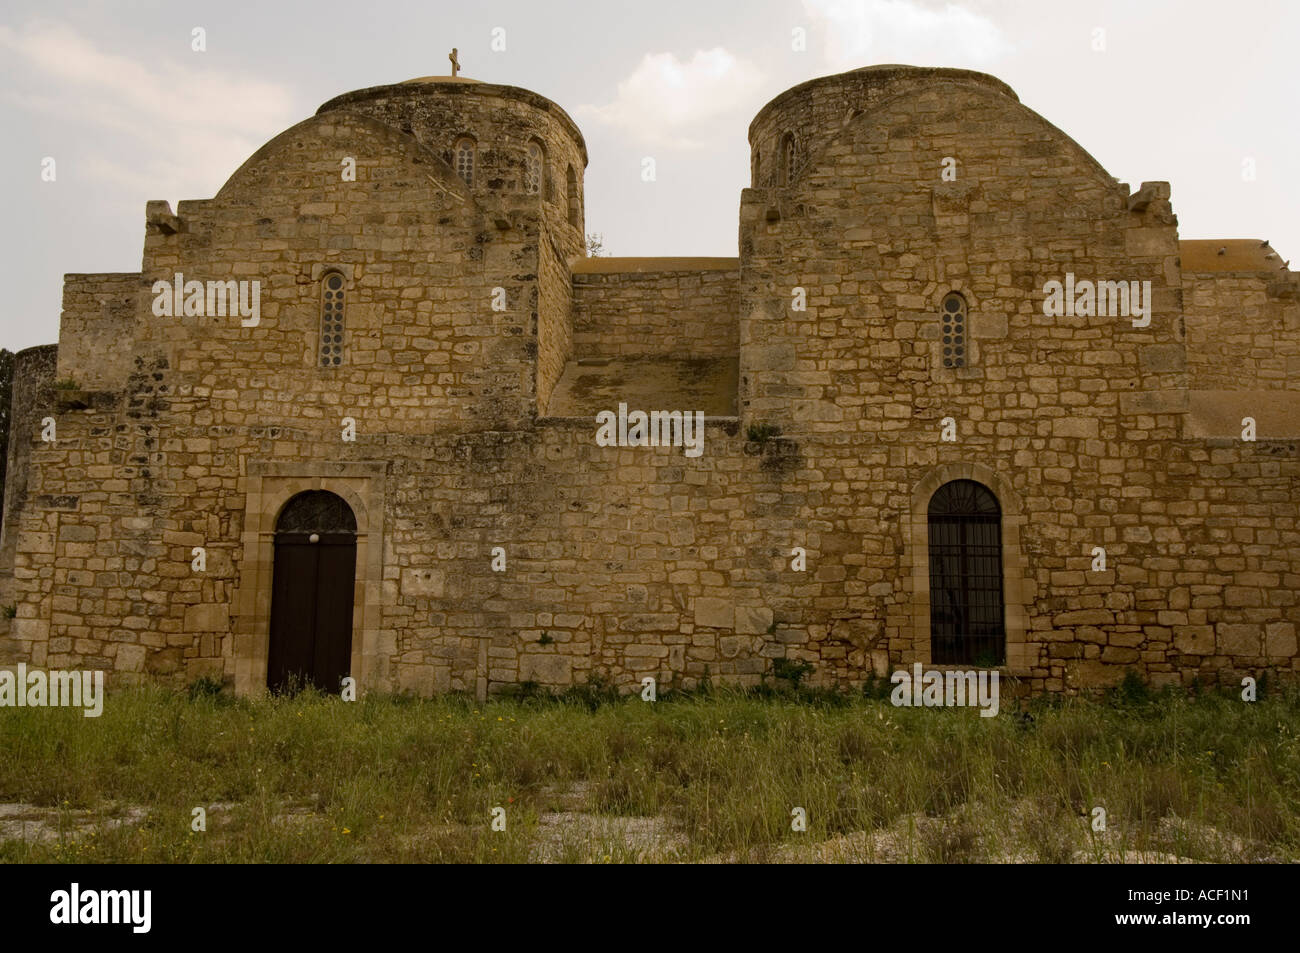 The monastery church of St Barnabas near Famagusta, Gazimagusa, Northern Cyprus, Europe, now an icon museum Stock Photo